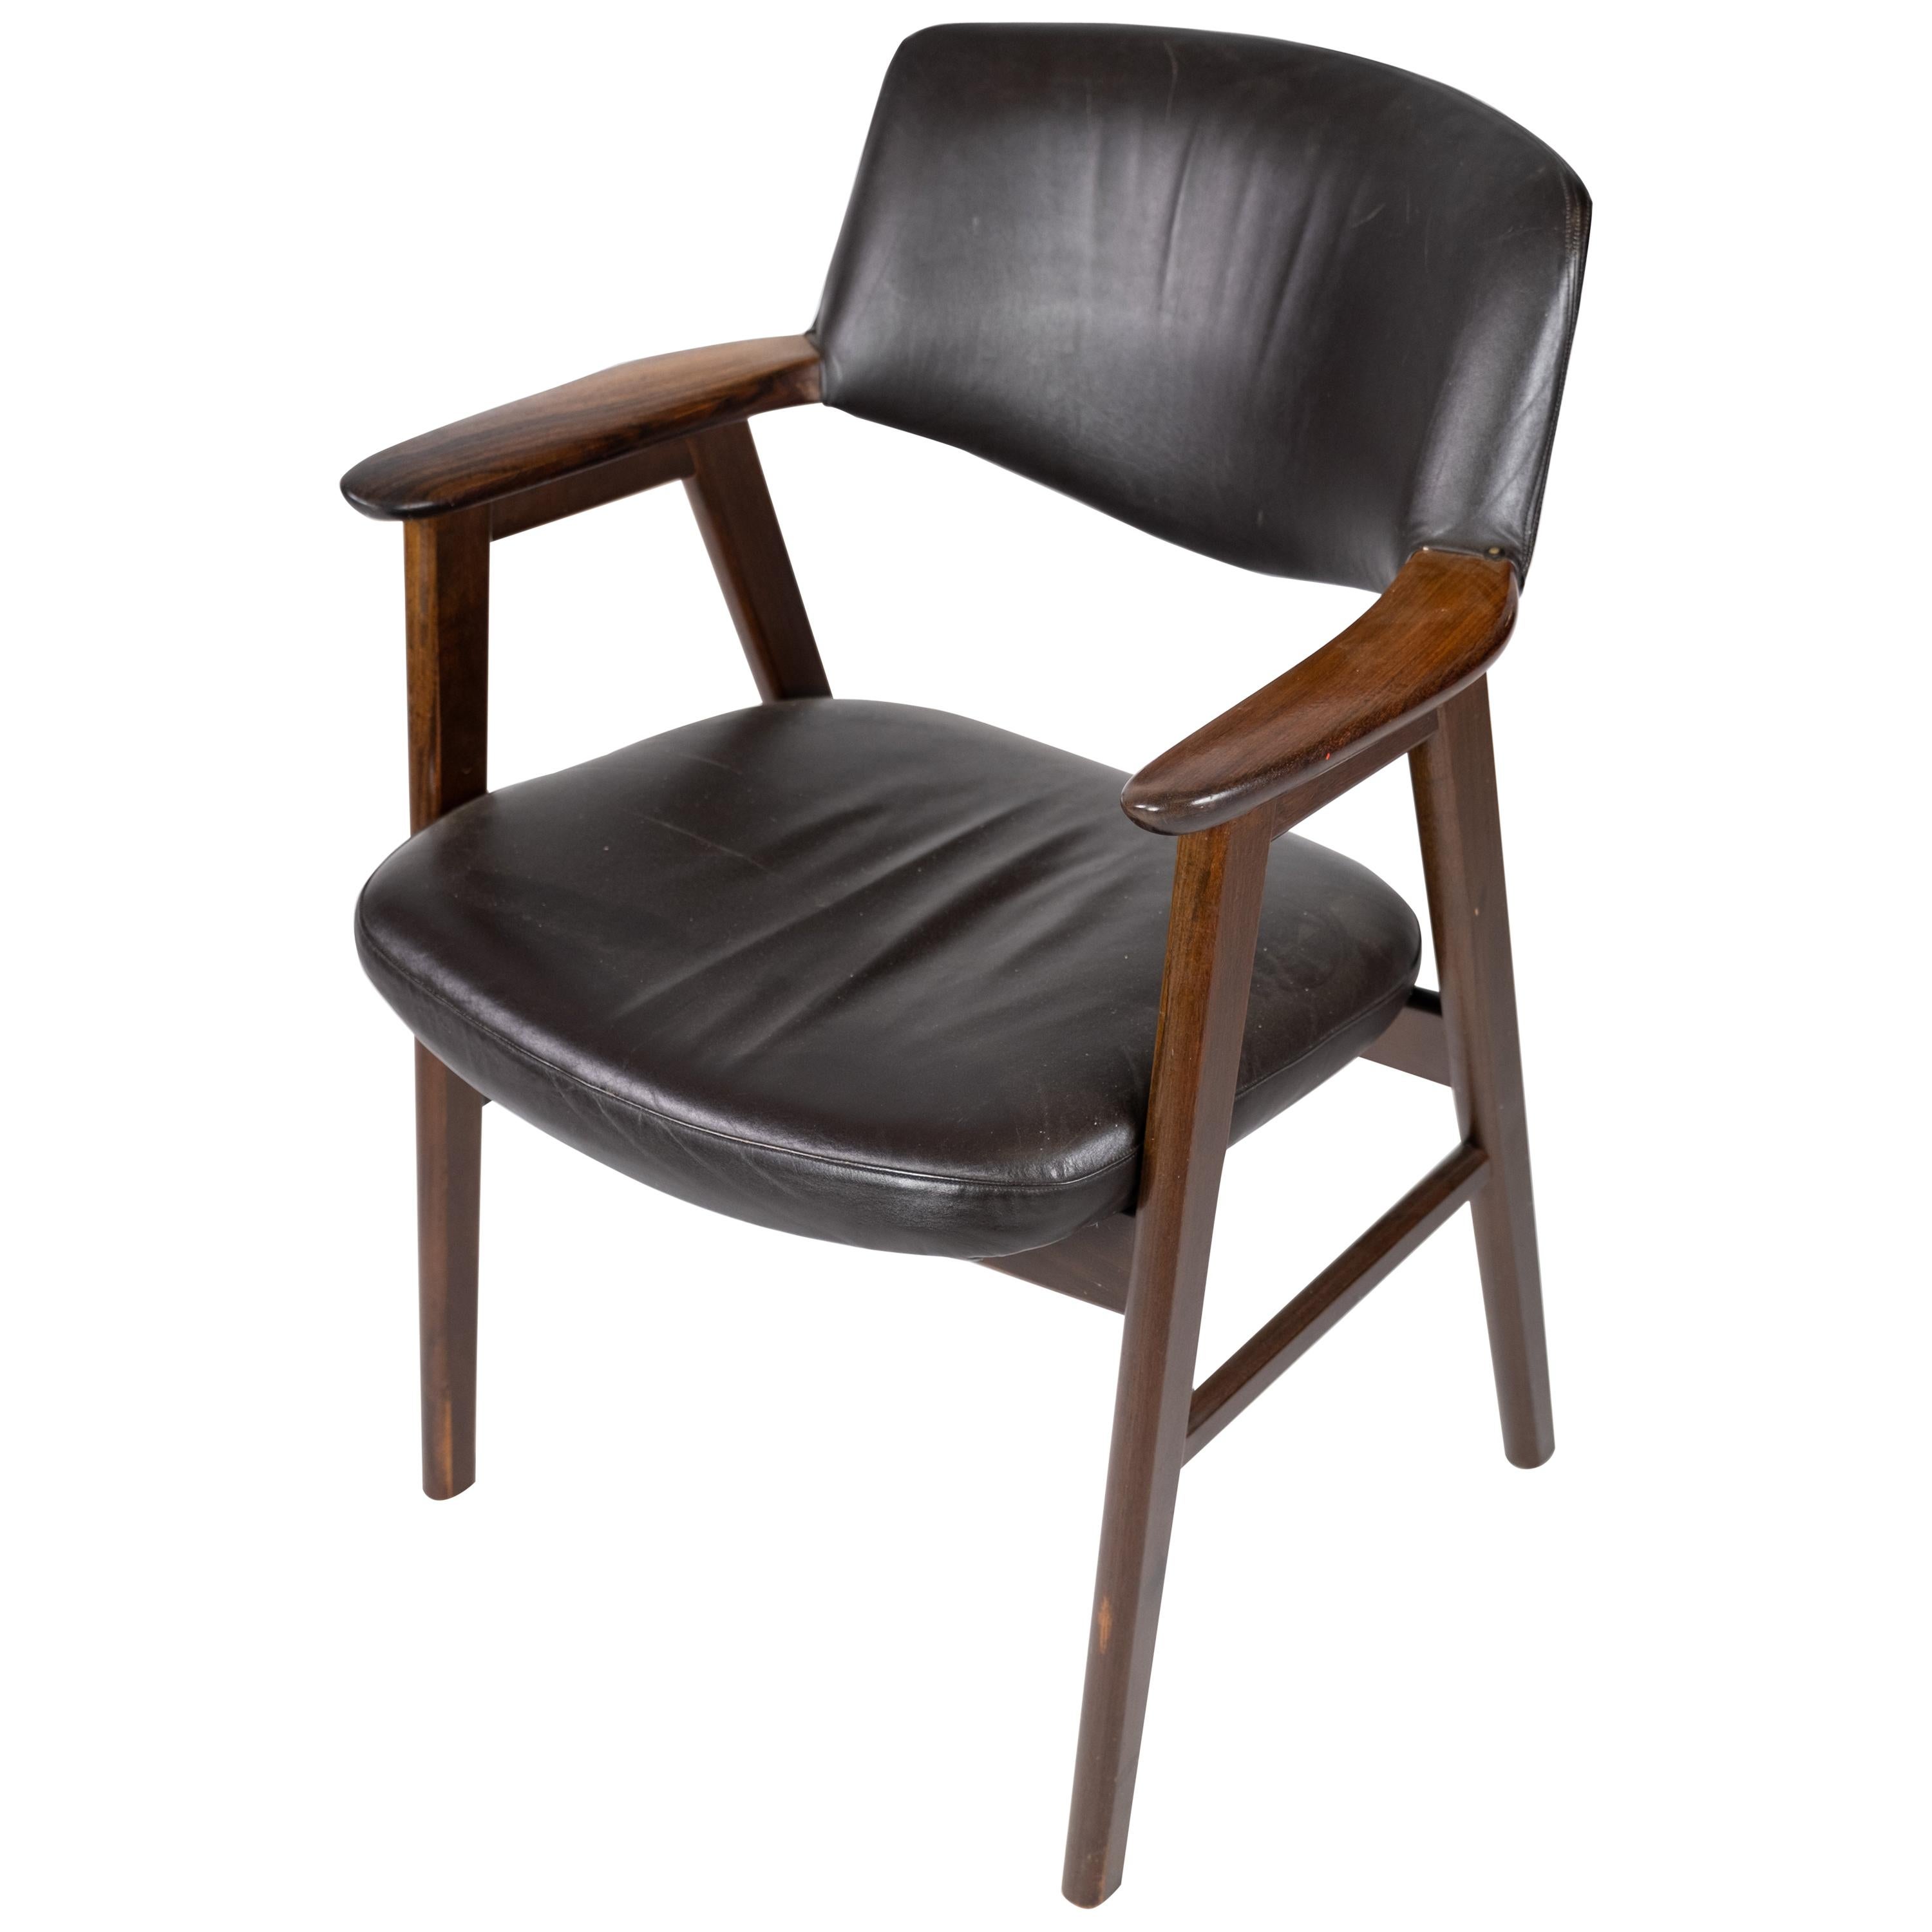 Armchair in Rosewood and Black Leather of Danish Design from 1976